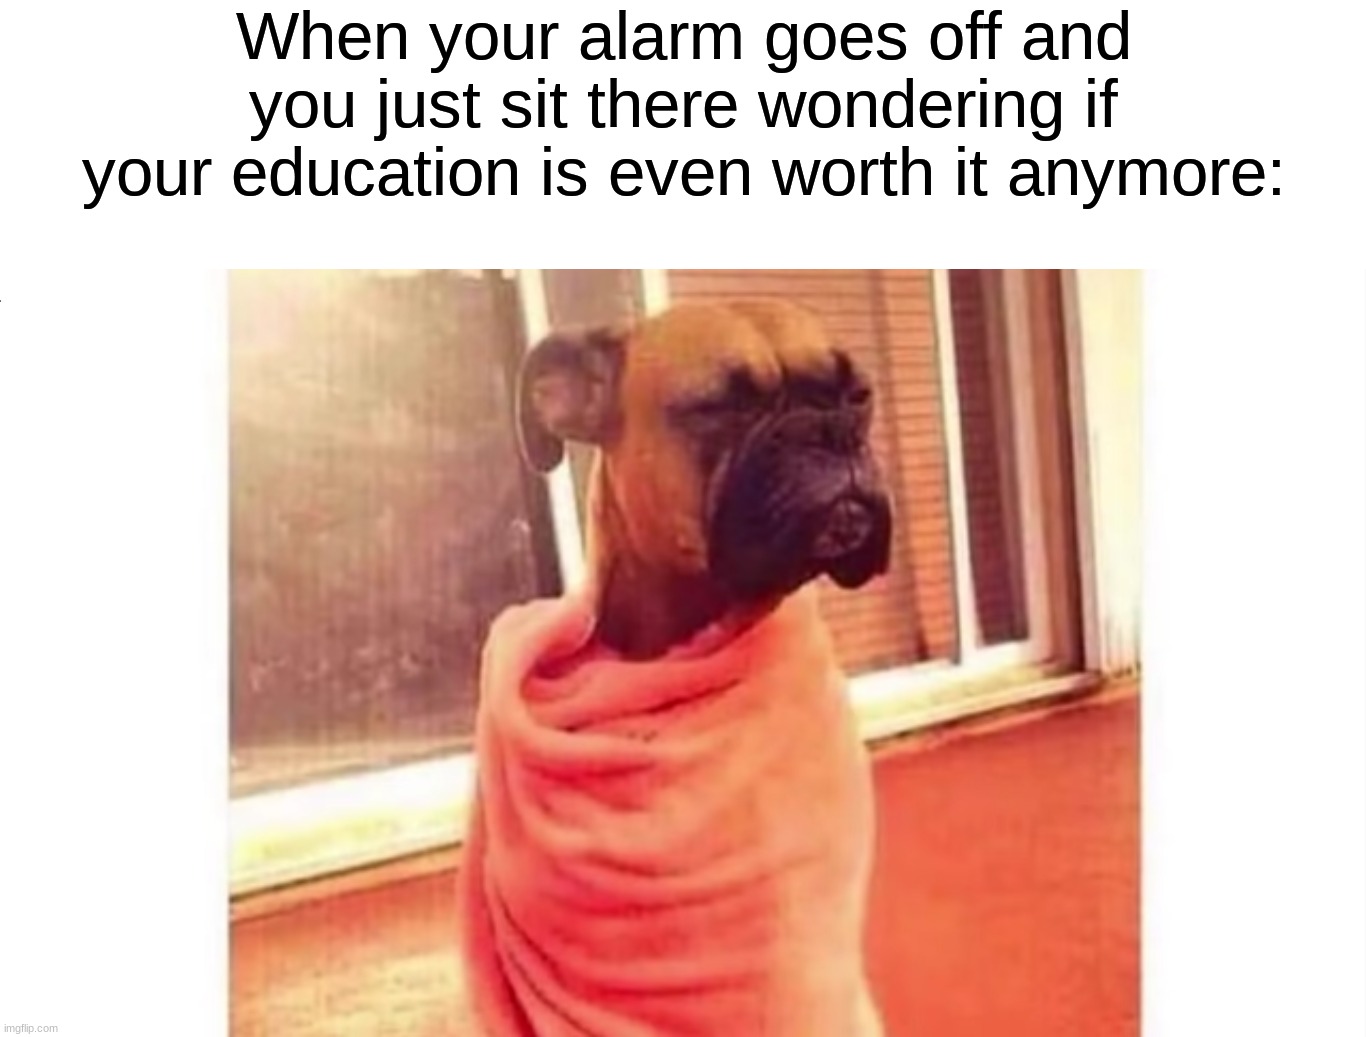 This is literally me ಥ‿ಥ | When your alarm goes off and you just sit there wondering if your education is even worth it anymore: | image tagged in memes,funny,true story,relatable memes,dogs,sleep | made w/ Imgflip meme maker